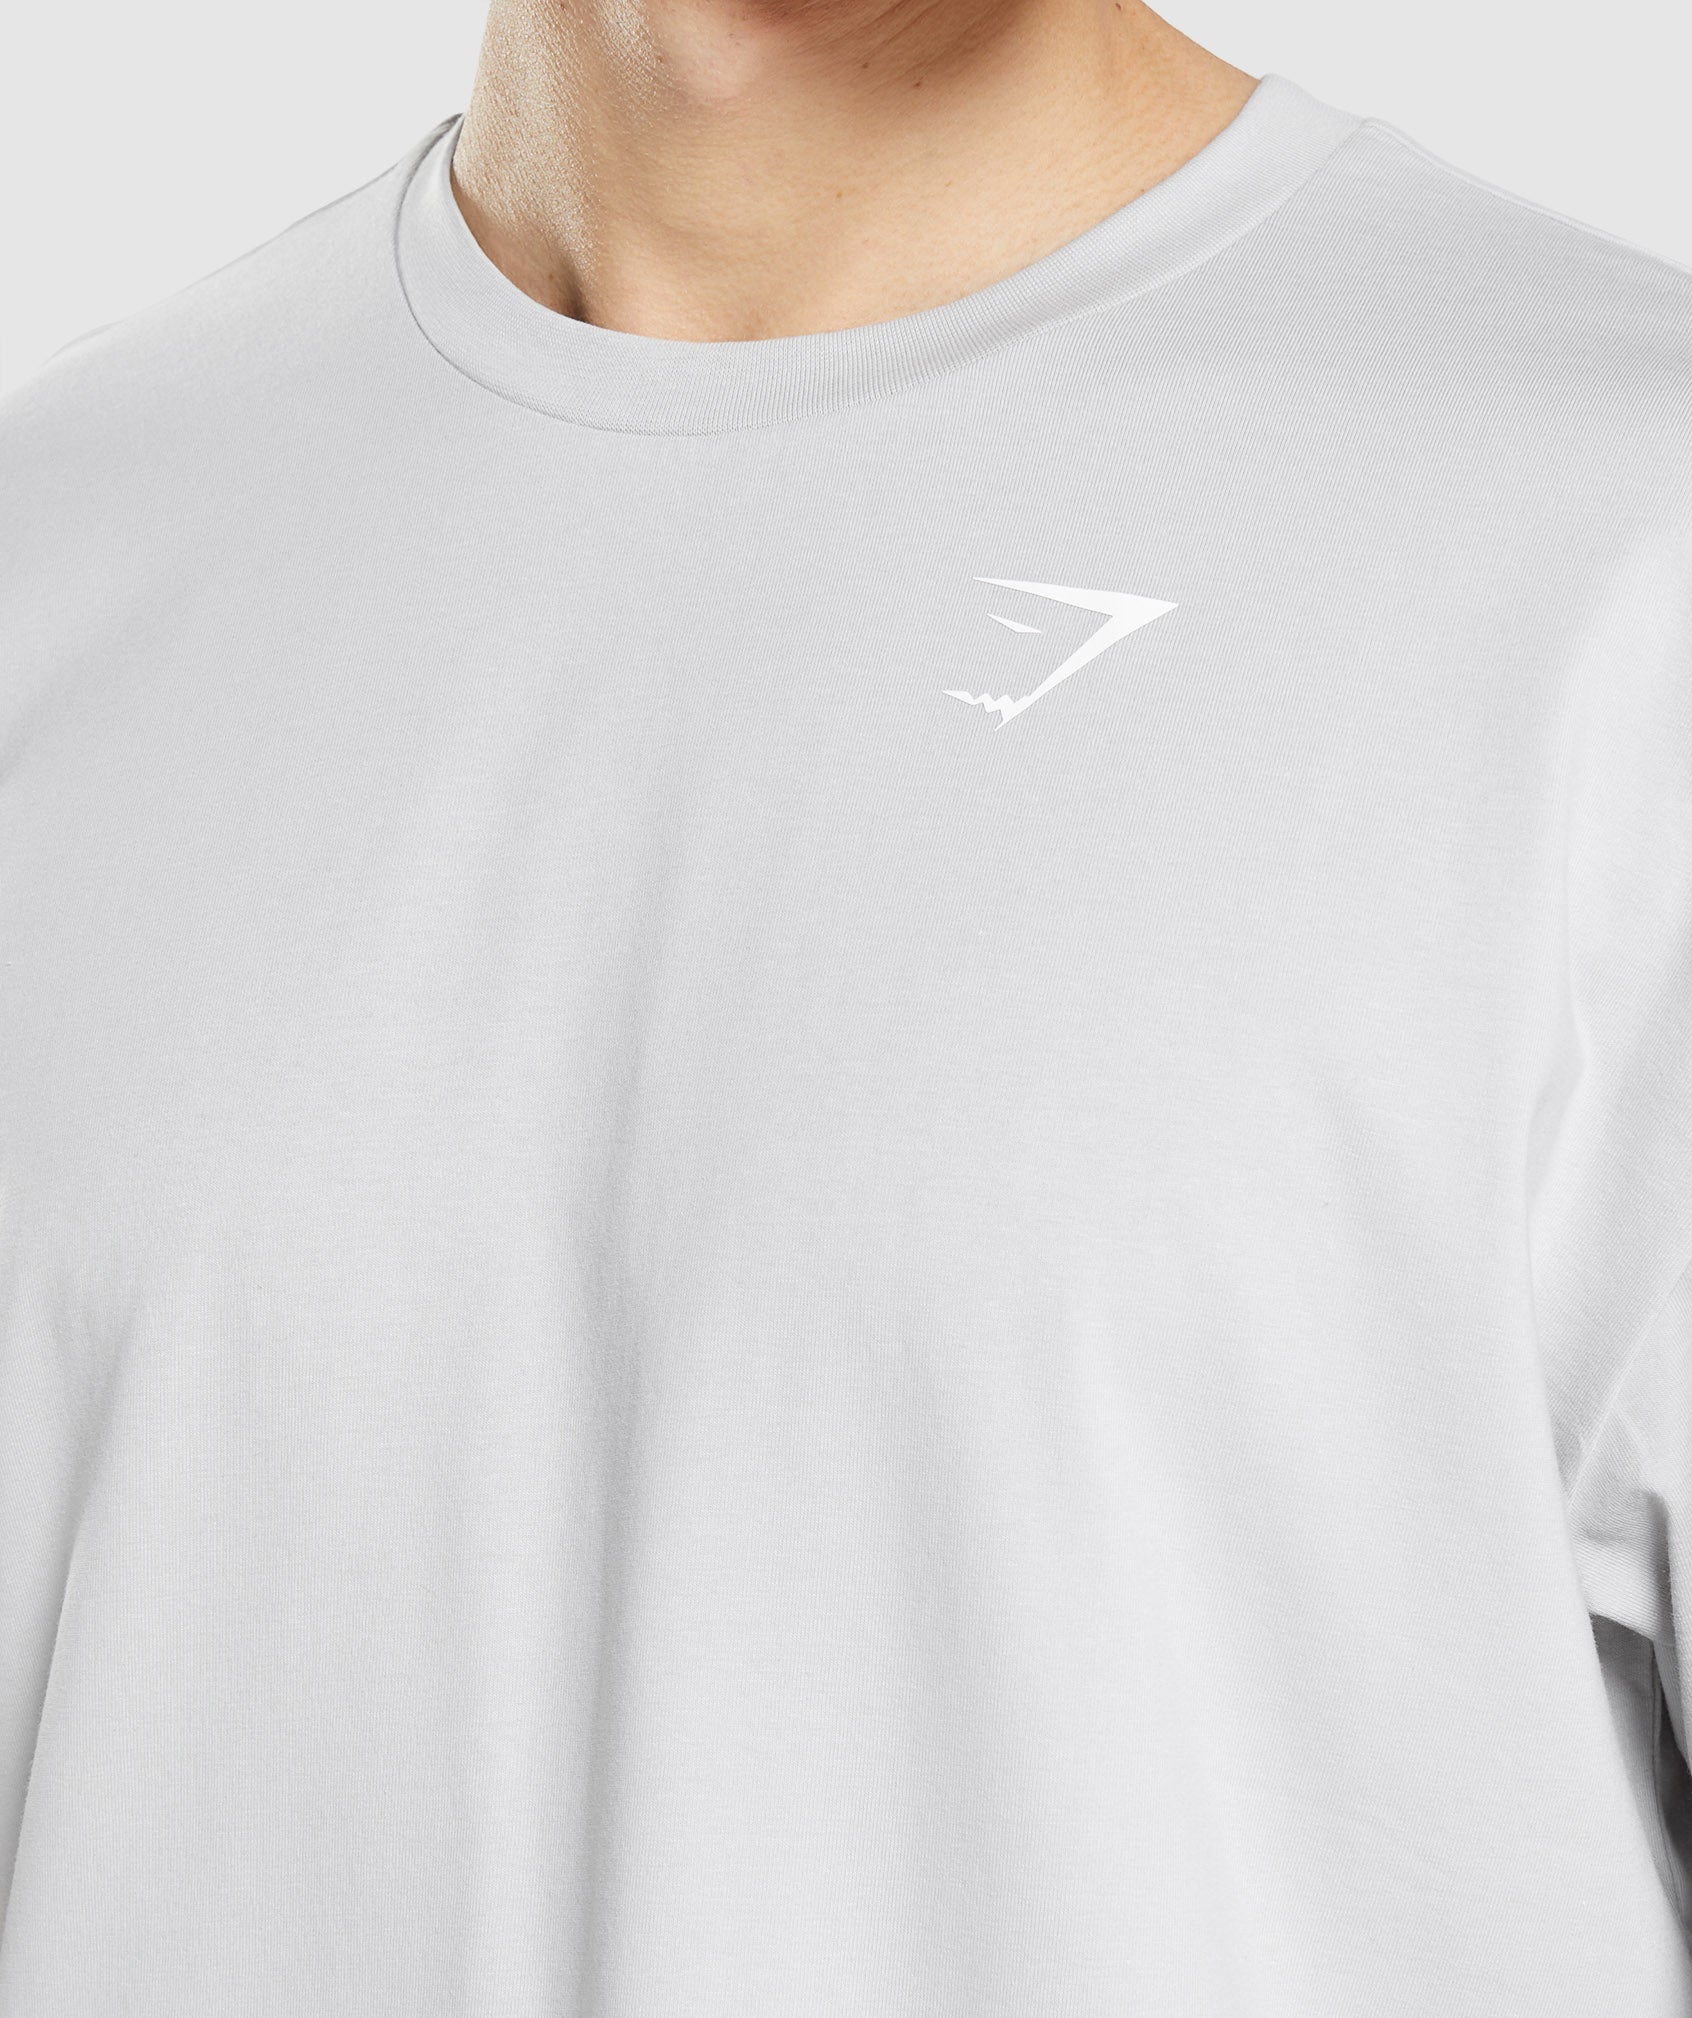 Gymshark Essential Tee - Is it worth the price?